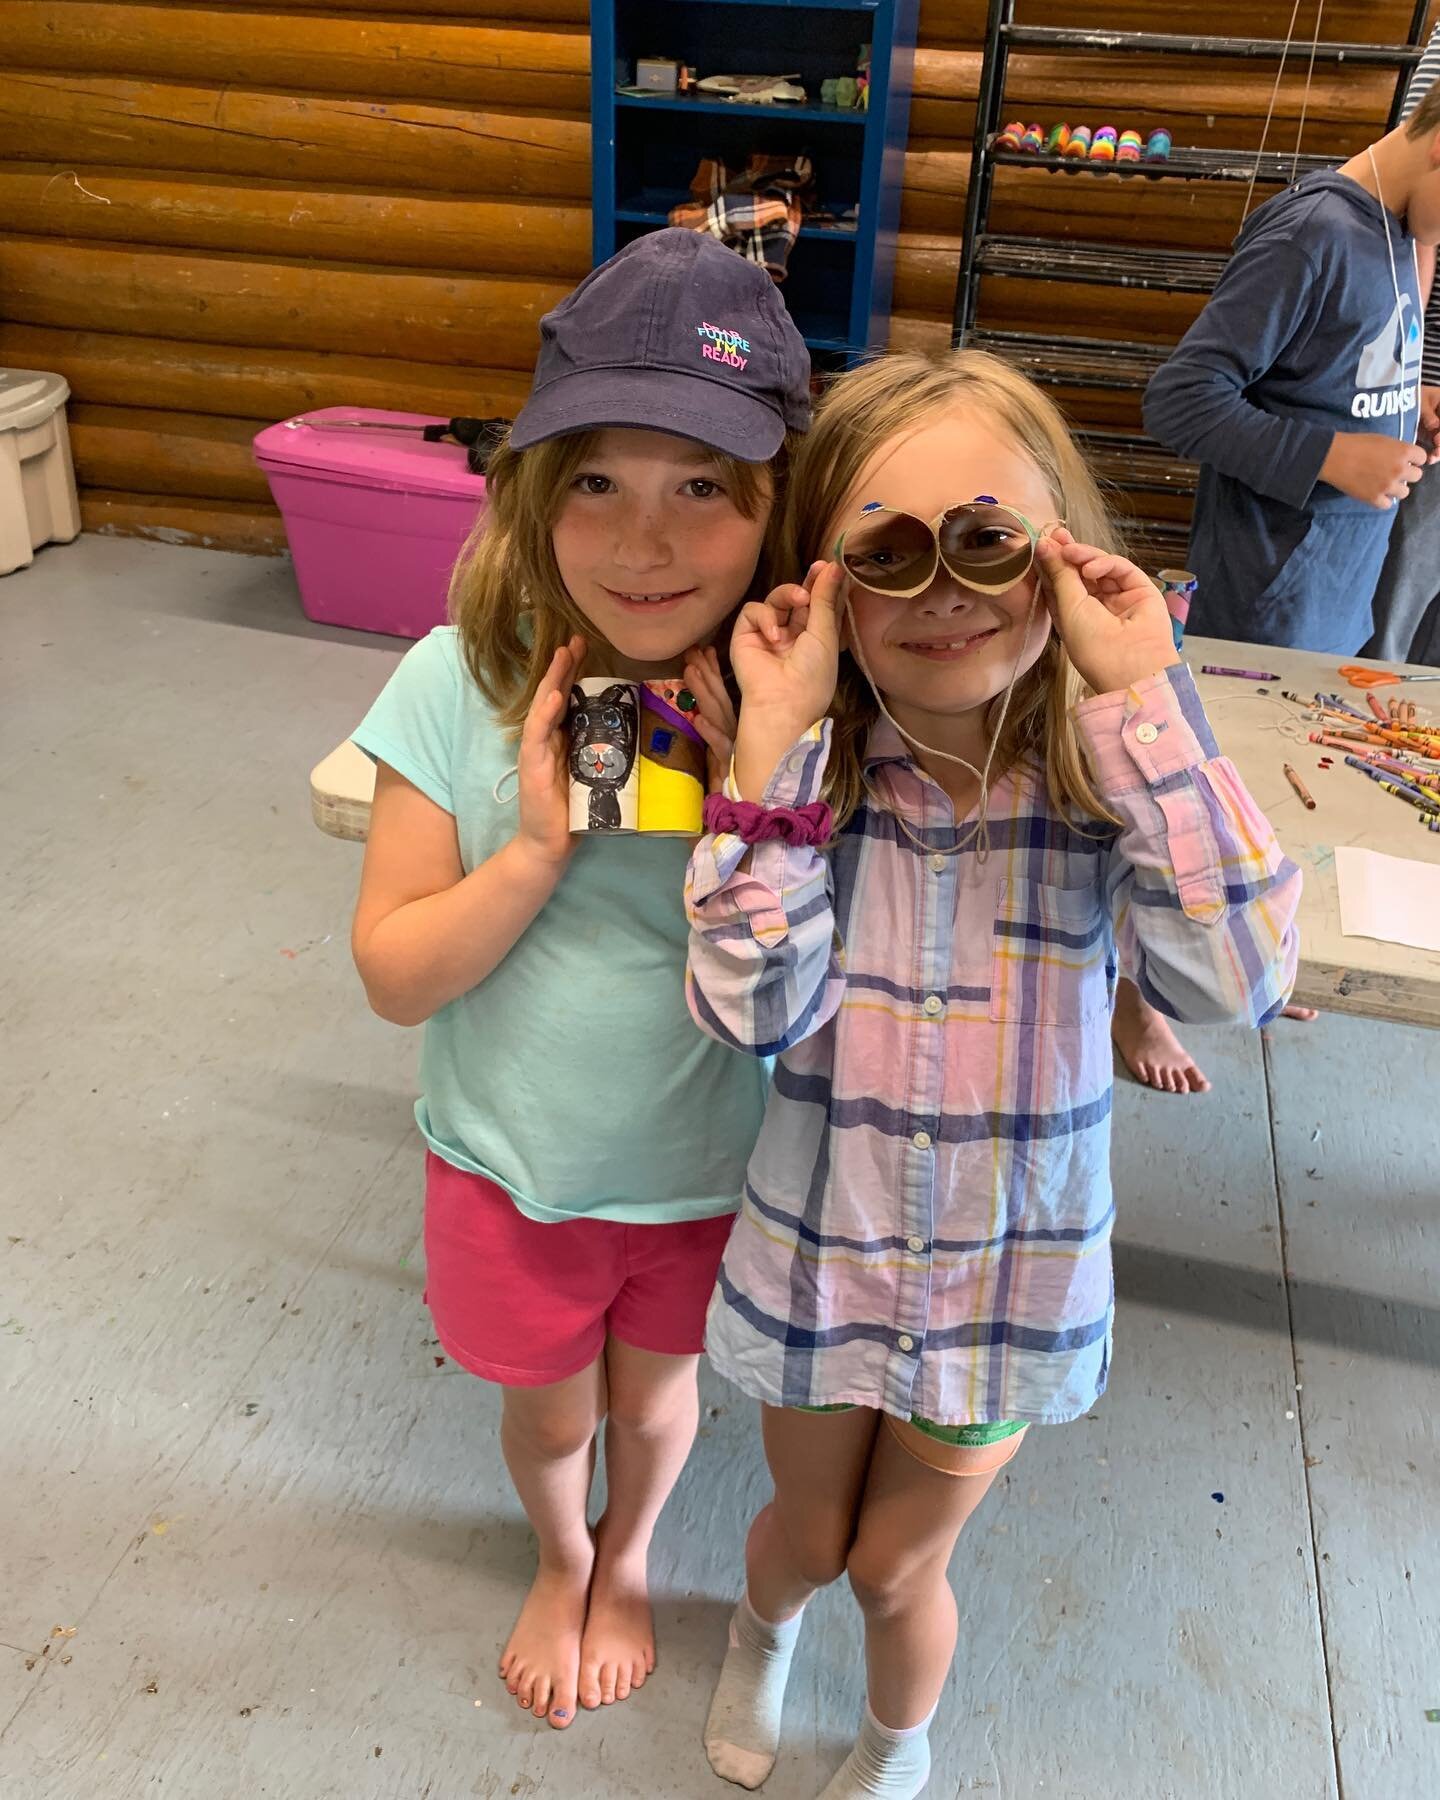 For number 13 of our Top 17 Things We Love About Camp, it&rsquo;s that there&rsquo;s so many opportunities to be creative! From crafts to spirits to theme quest challenges, our campers are constantly surprising us with the imaginative things they com